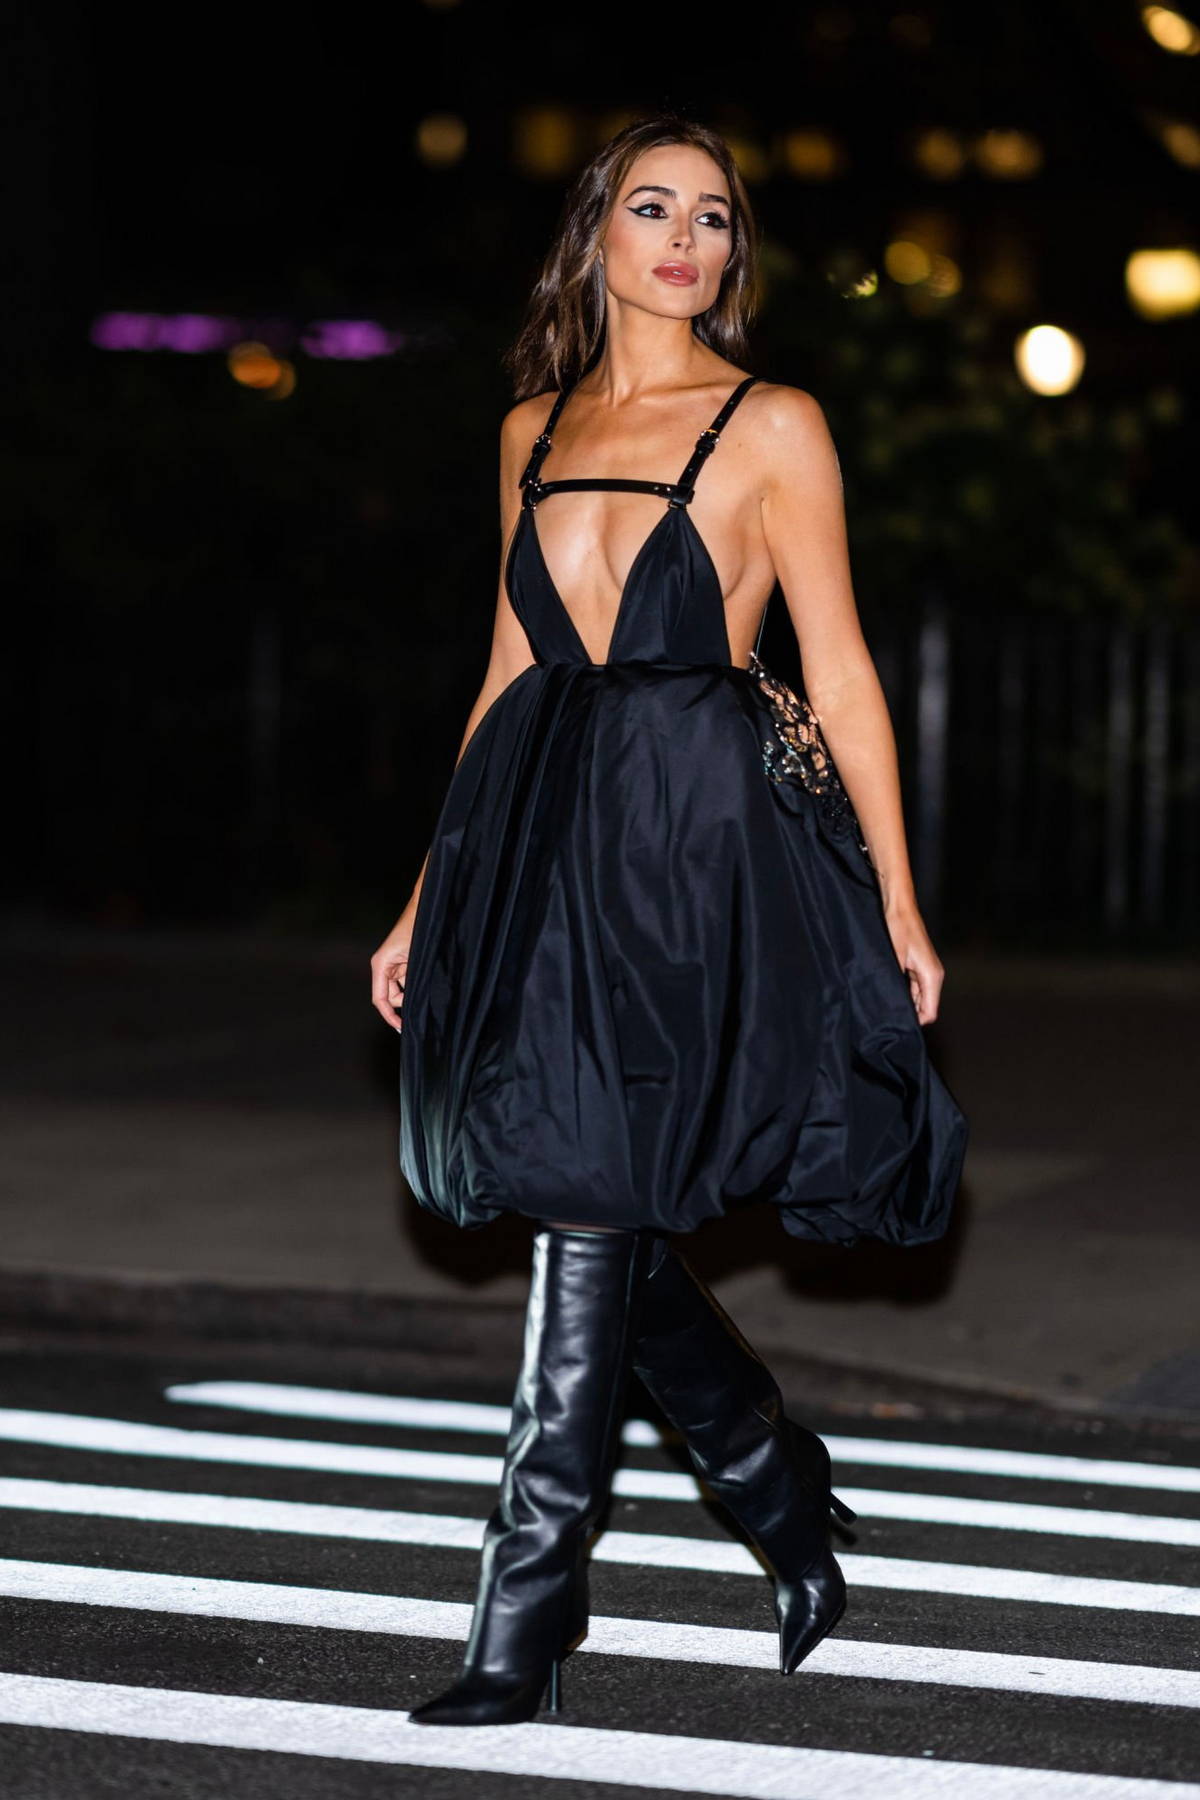 Olivia Culpo puts her toned legs on display in black leather